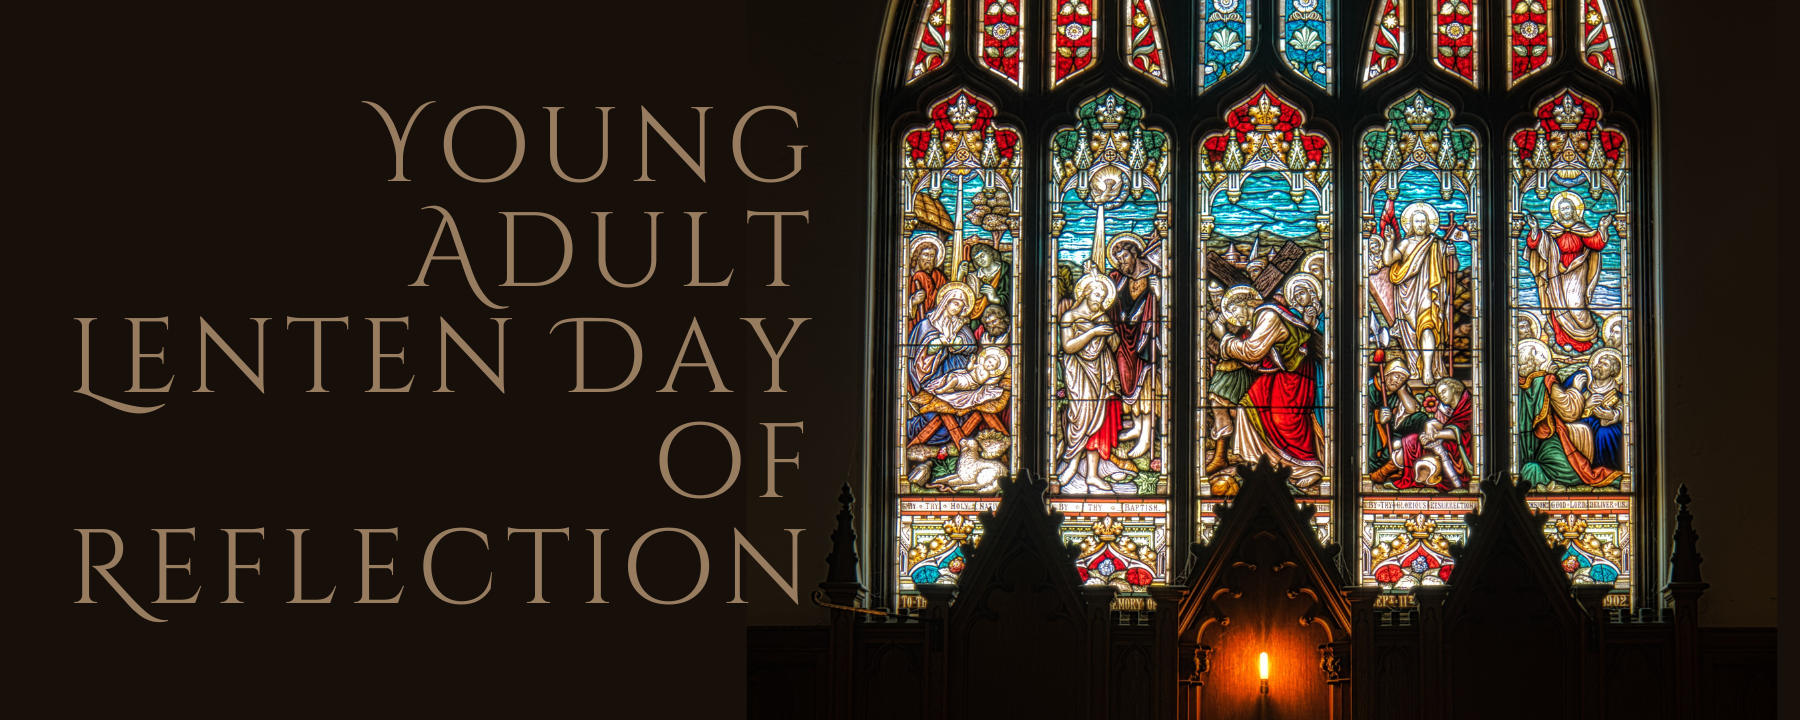 Young Adult Lenten Day of Reflection